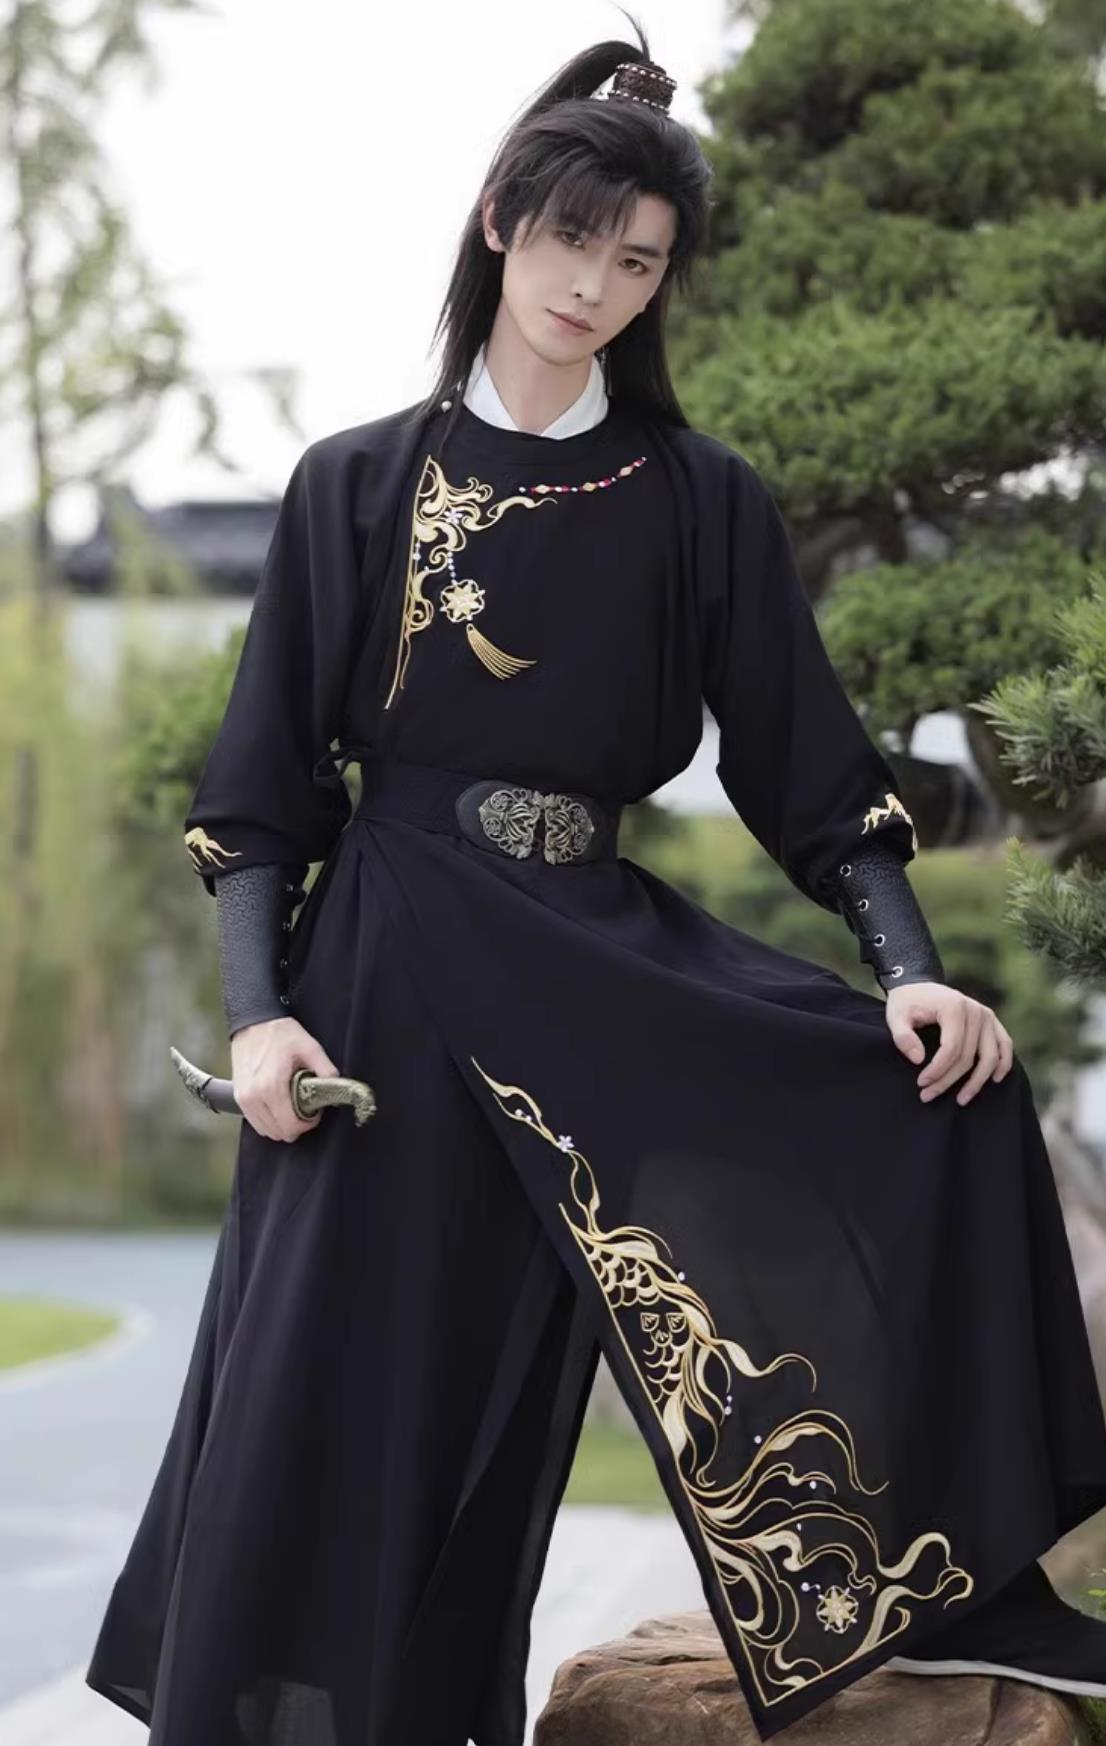 Ancient China Swordsman Clothing Chinese Travel Photography Costume Traditional Hanfu Young Hero Black Outfit